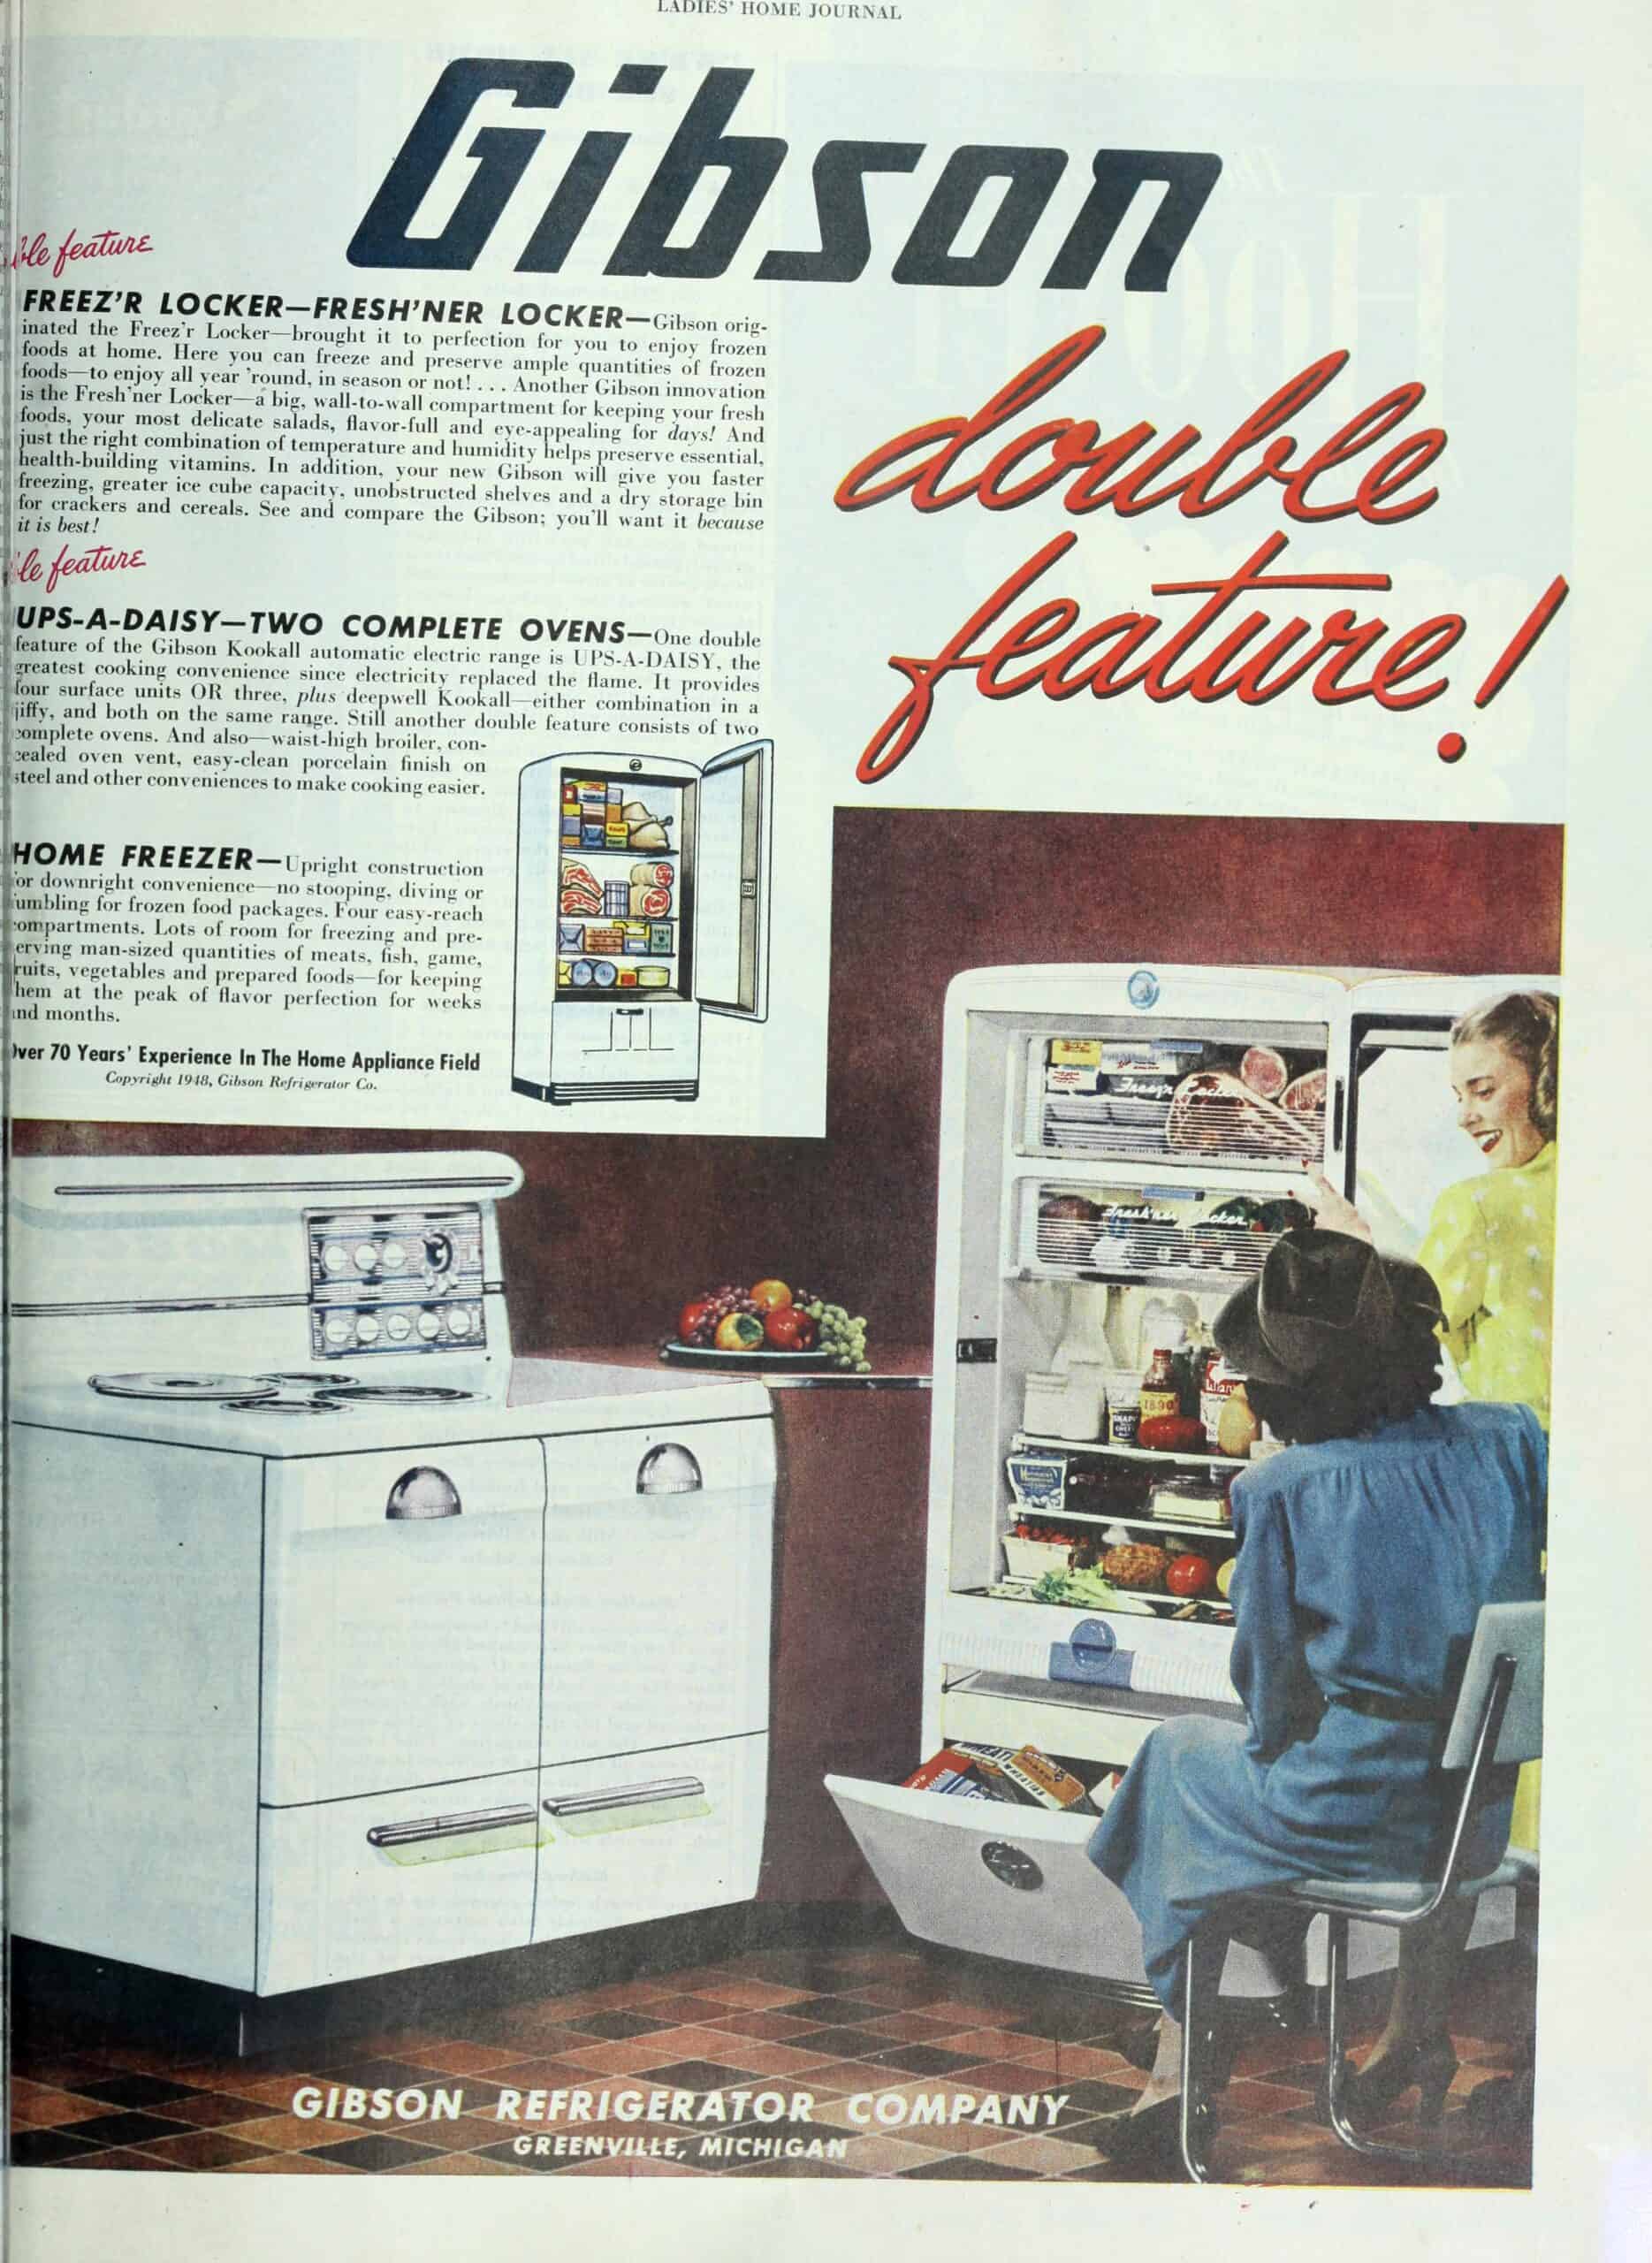 Gibson appliance ad from The Ladies Home Journal, 1948